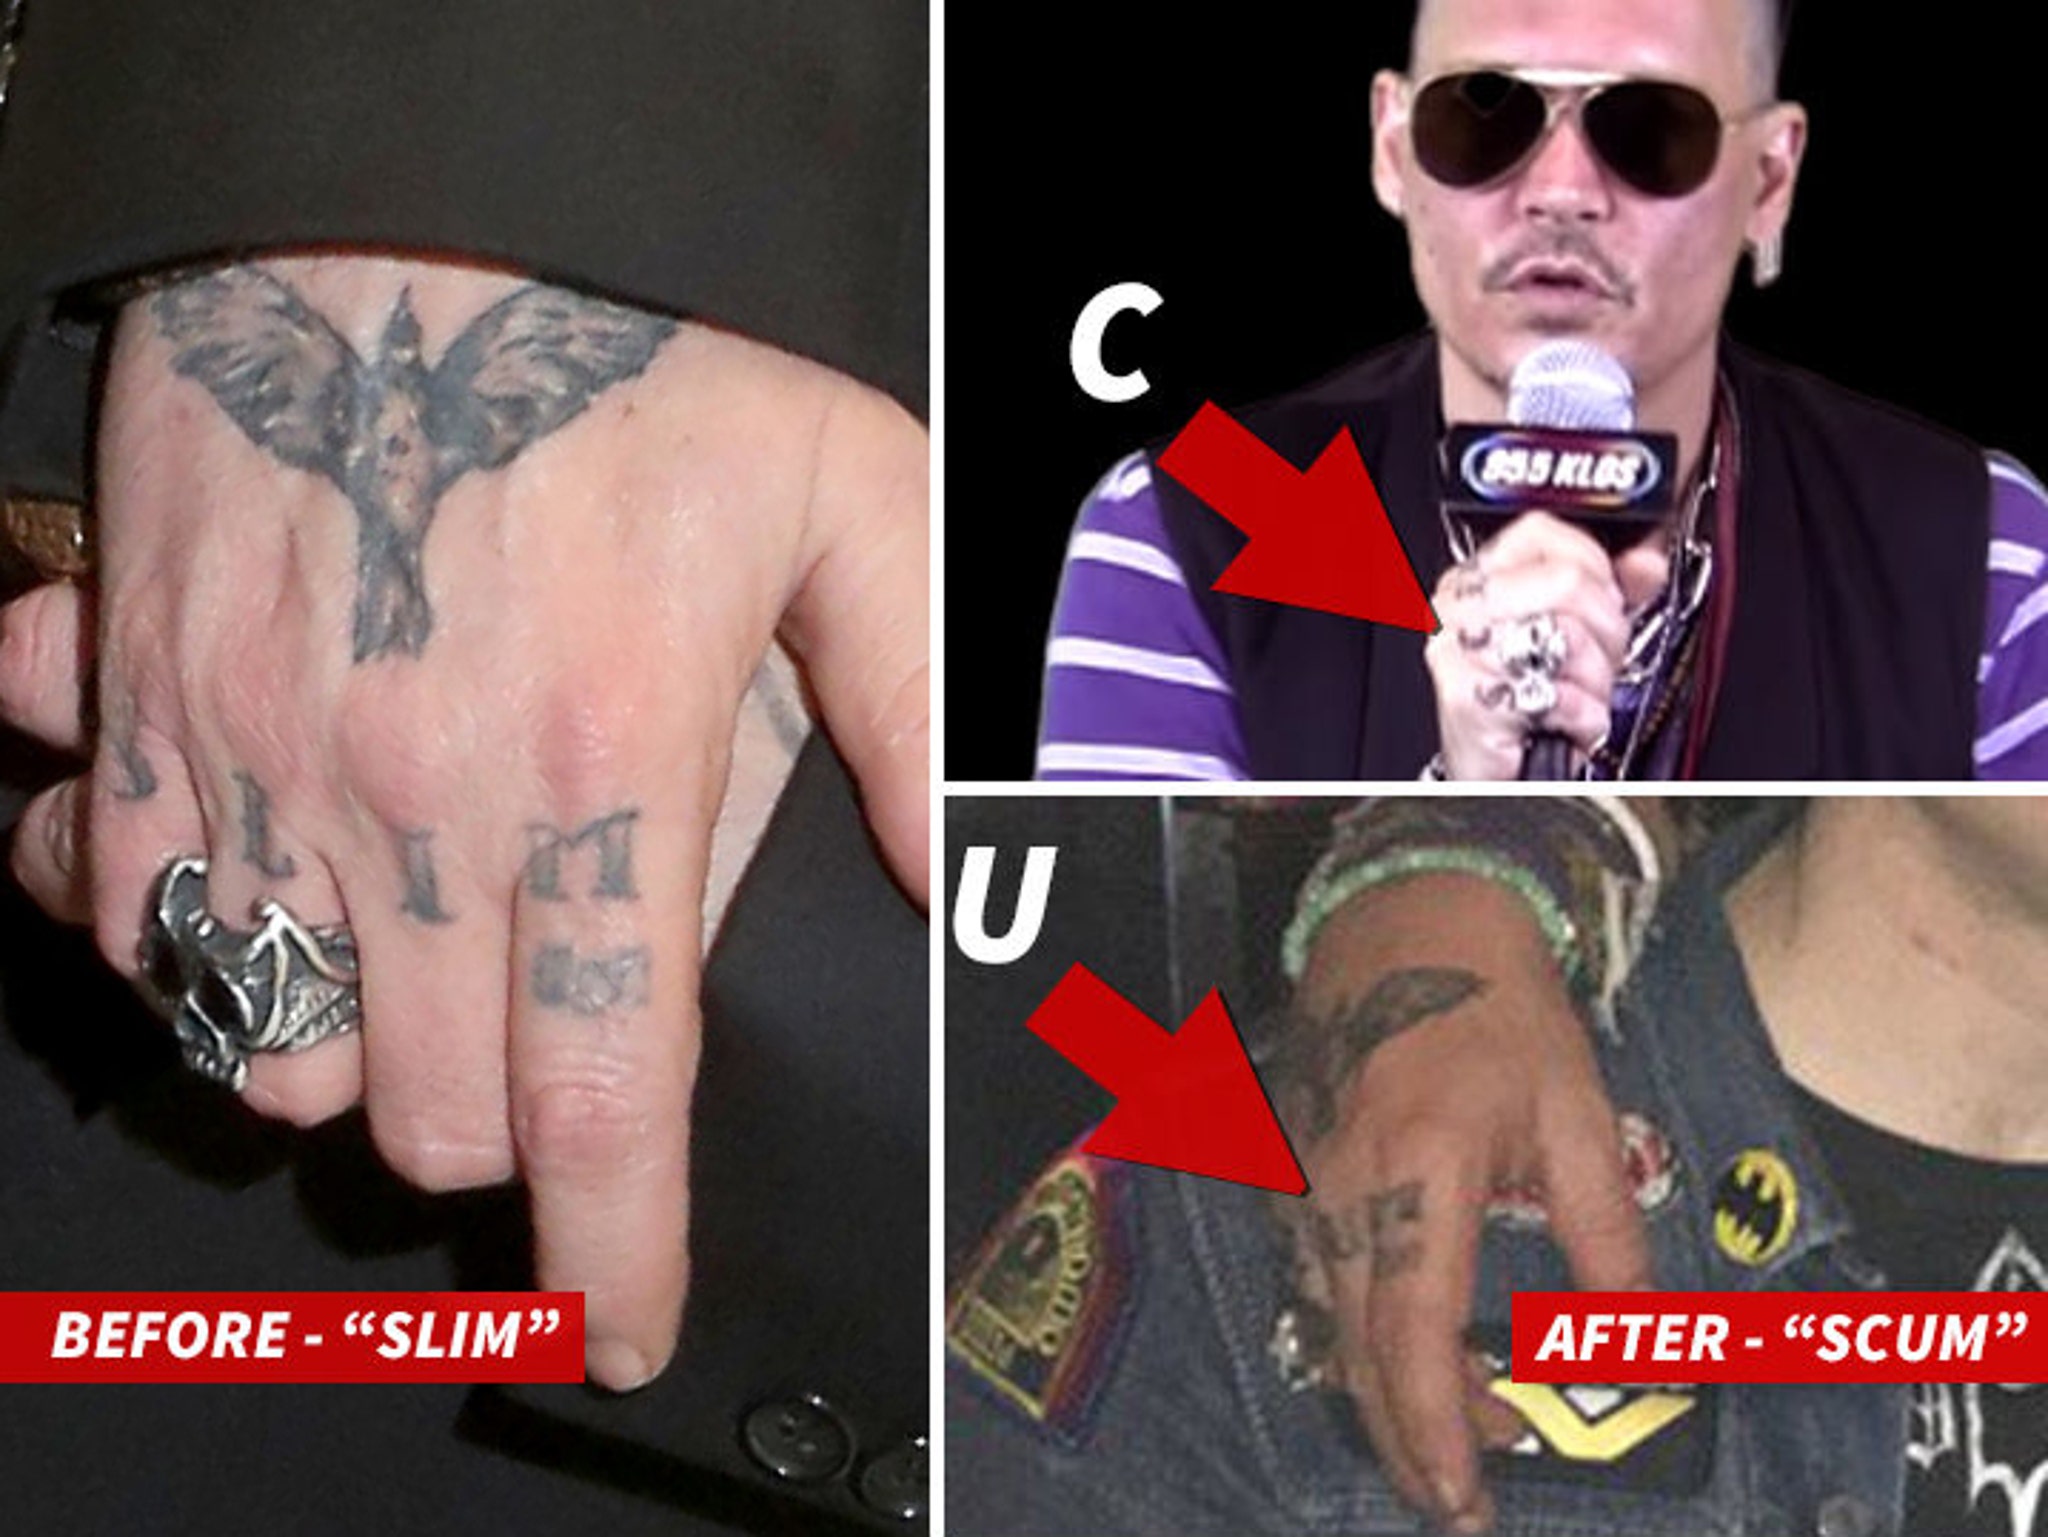 Woman sparks debate after getting unhinged tattoo of Johnny Depps lawyer   indy100